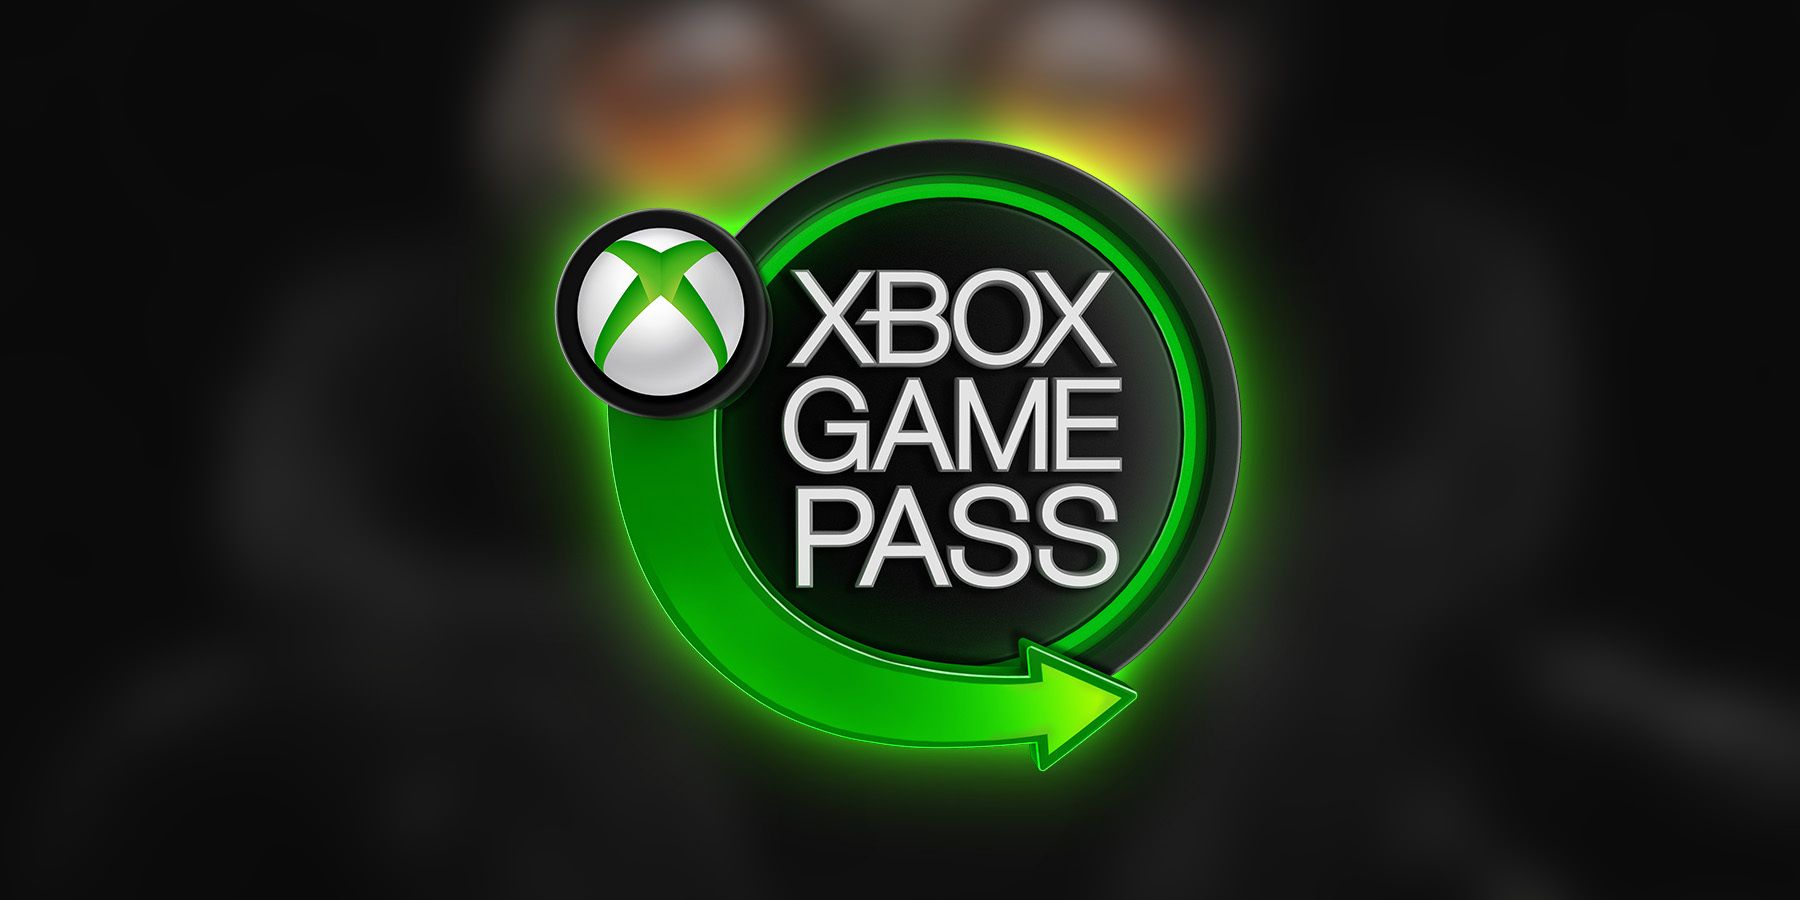 xbox-game-pass-frost-punk-2-game-rant-4